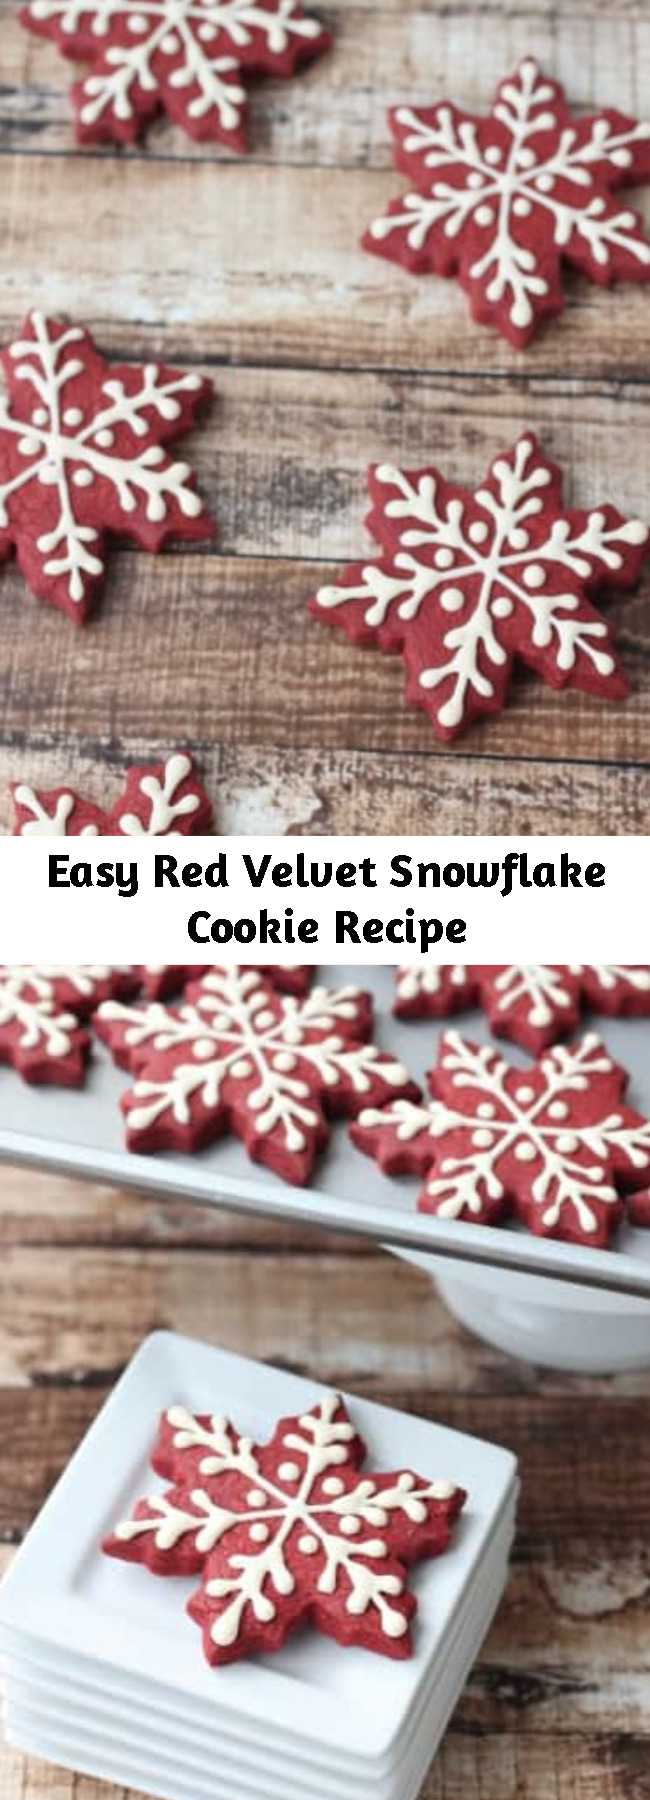 Easy Red Velvet Snowflake Cookie Recipe - These Red Velvet Snowflake Cookies are just perfect to make as soon as the cool weather hits!